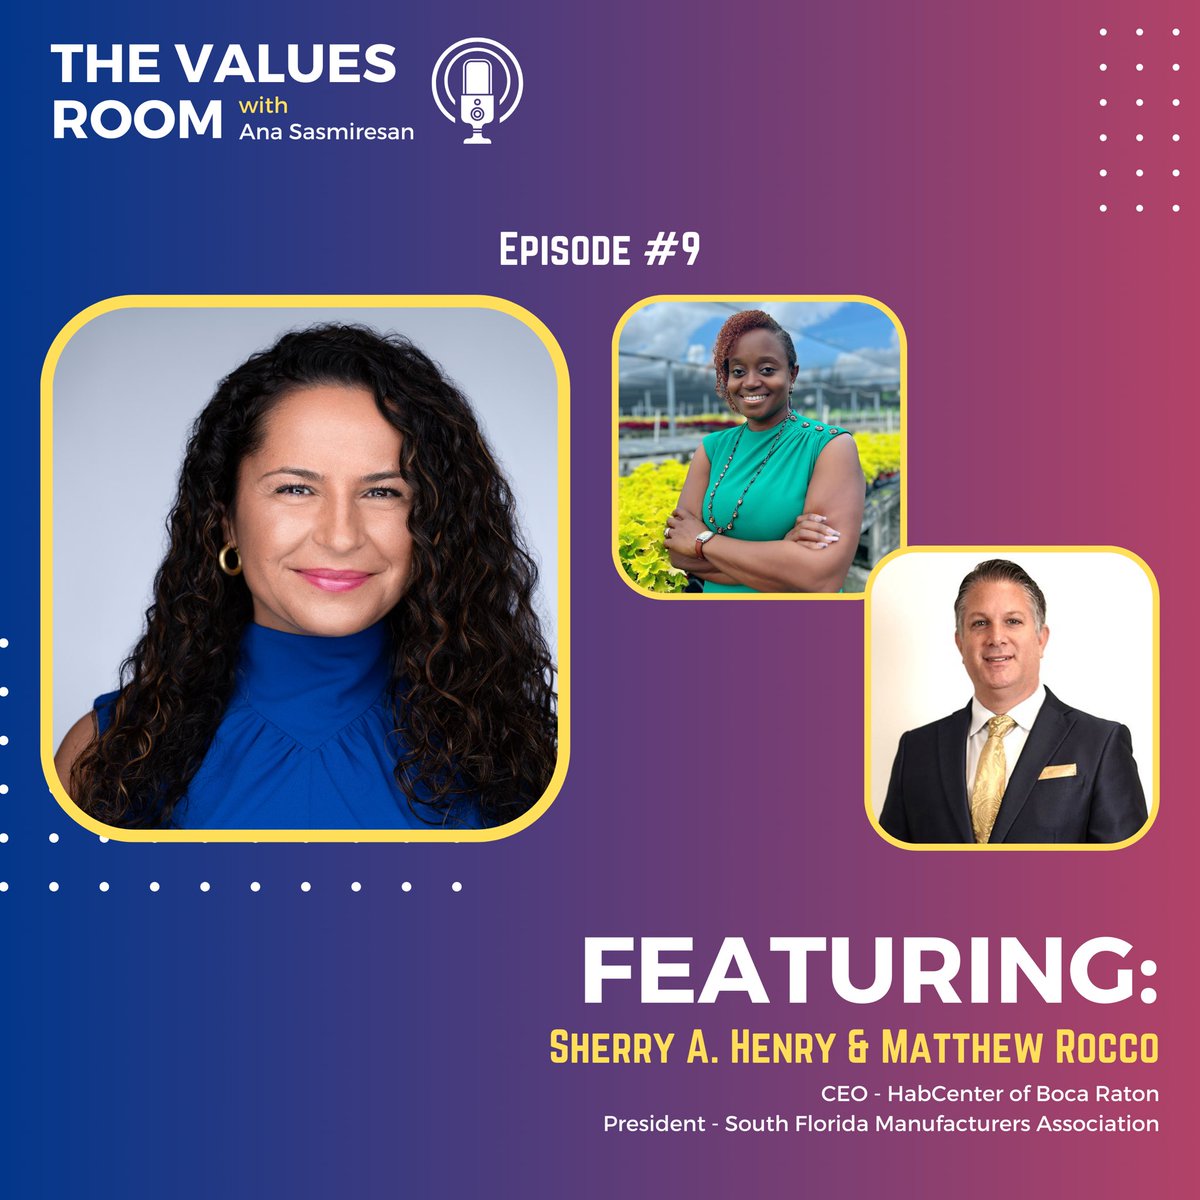 Learn more about the Values and Missions that advance Non-Profit causes for the HabCenter Boca Raton and the South Florida Manufacturers Association from Sherry A. Henry, CEO at HabCenter, and Matthew Rocco, President at SFMA. Listen to the podcast, open.spotify.com/episode/1ICPIl…